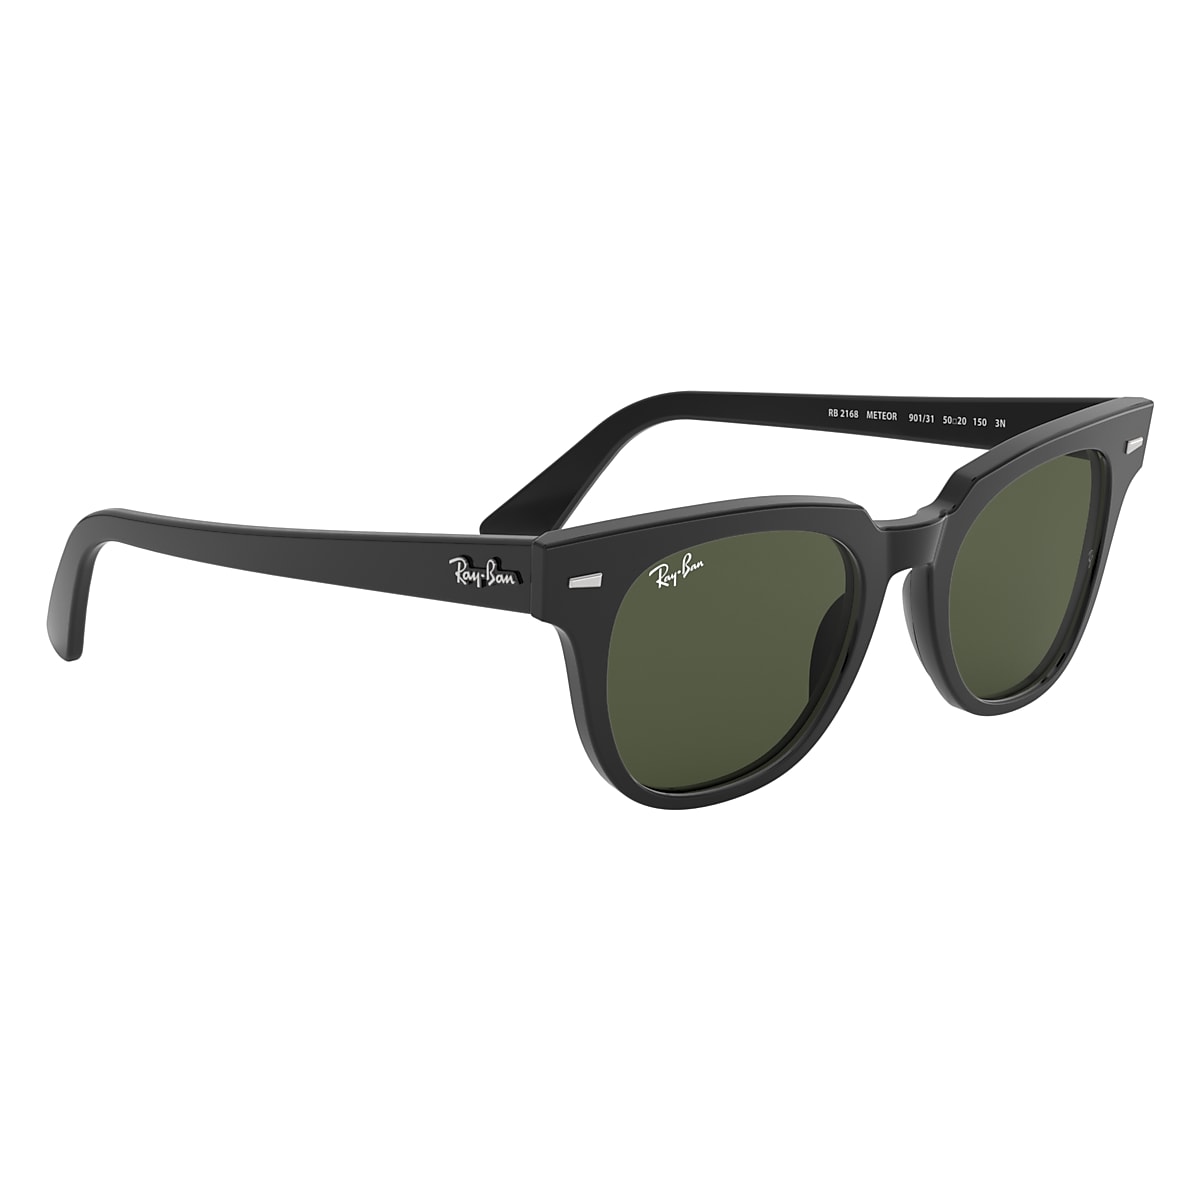 METEOR CLASSIC Sunglasses in Black and Green - RB2168 | Ray-Ban® US